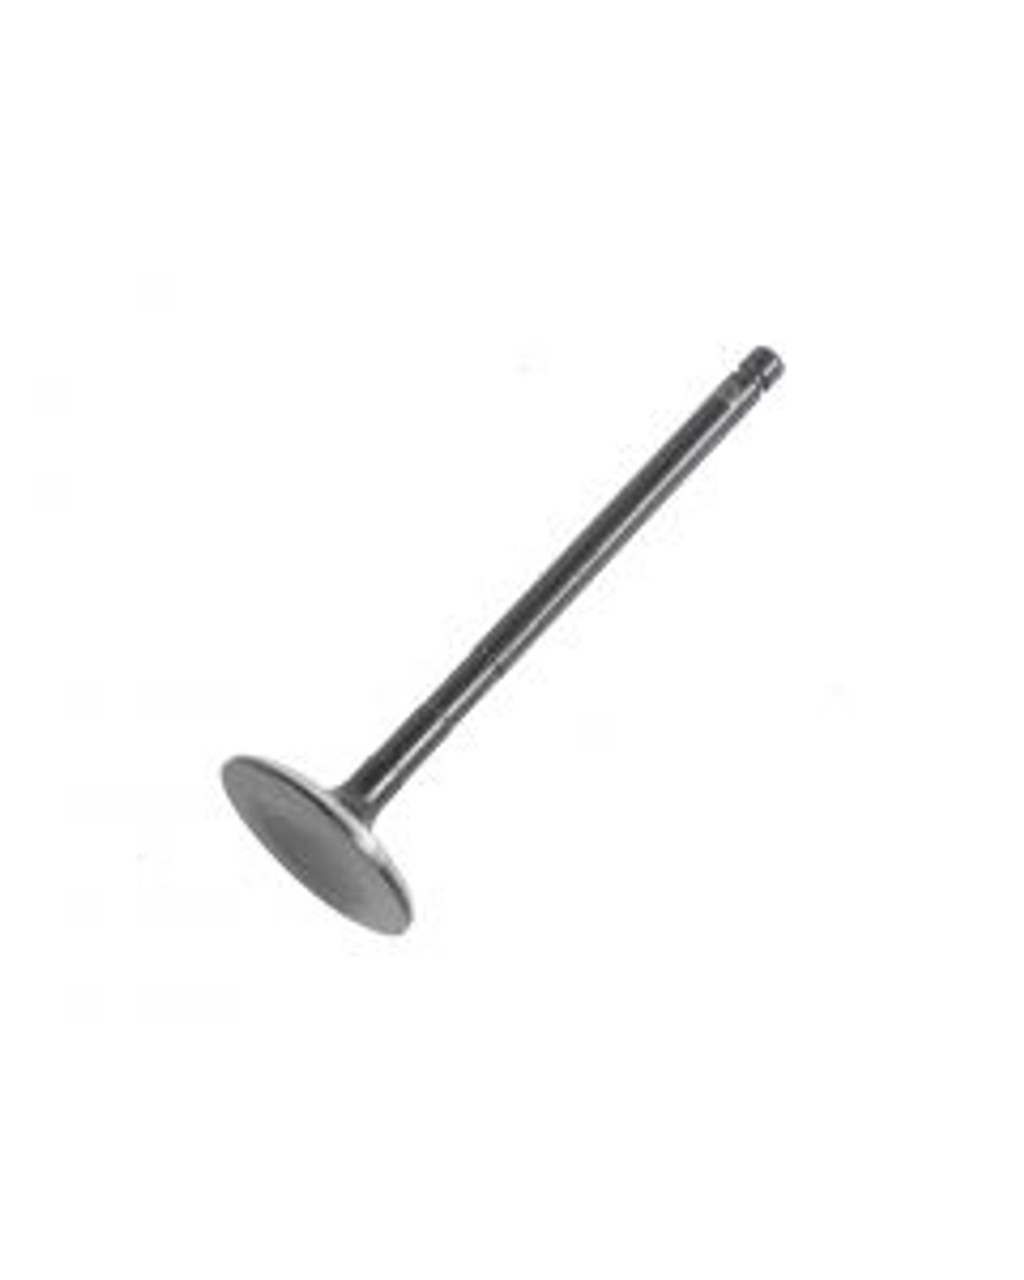 Exhaust Valve 5.0L 2012 Ford Mustang - EV4299.7